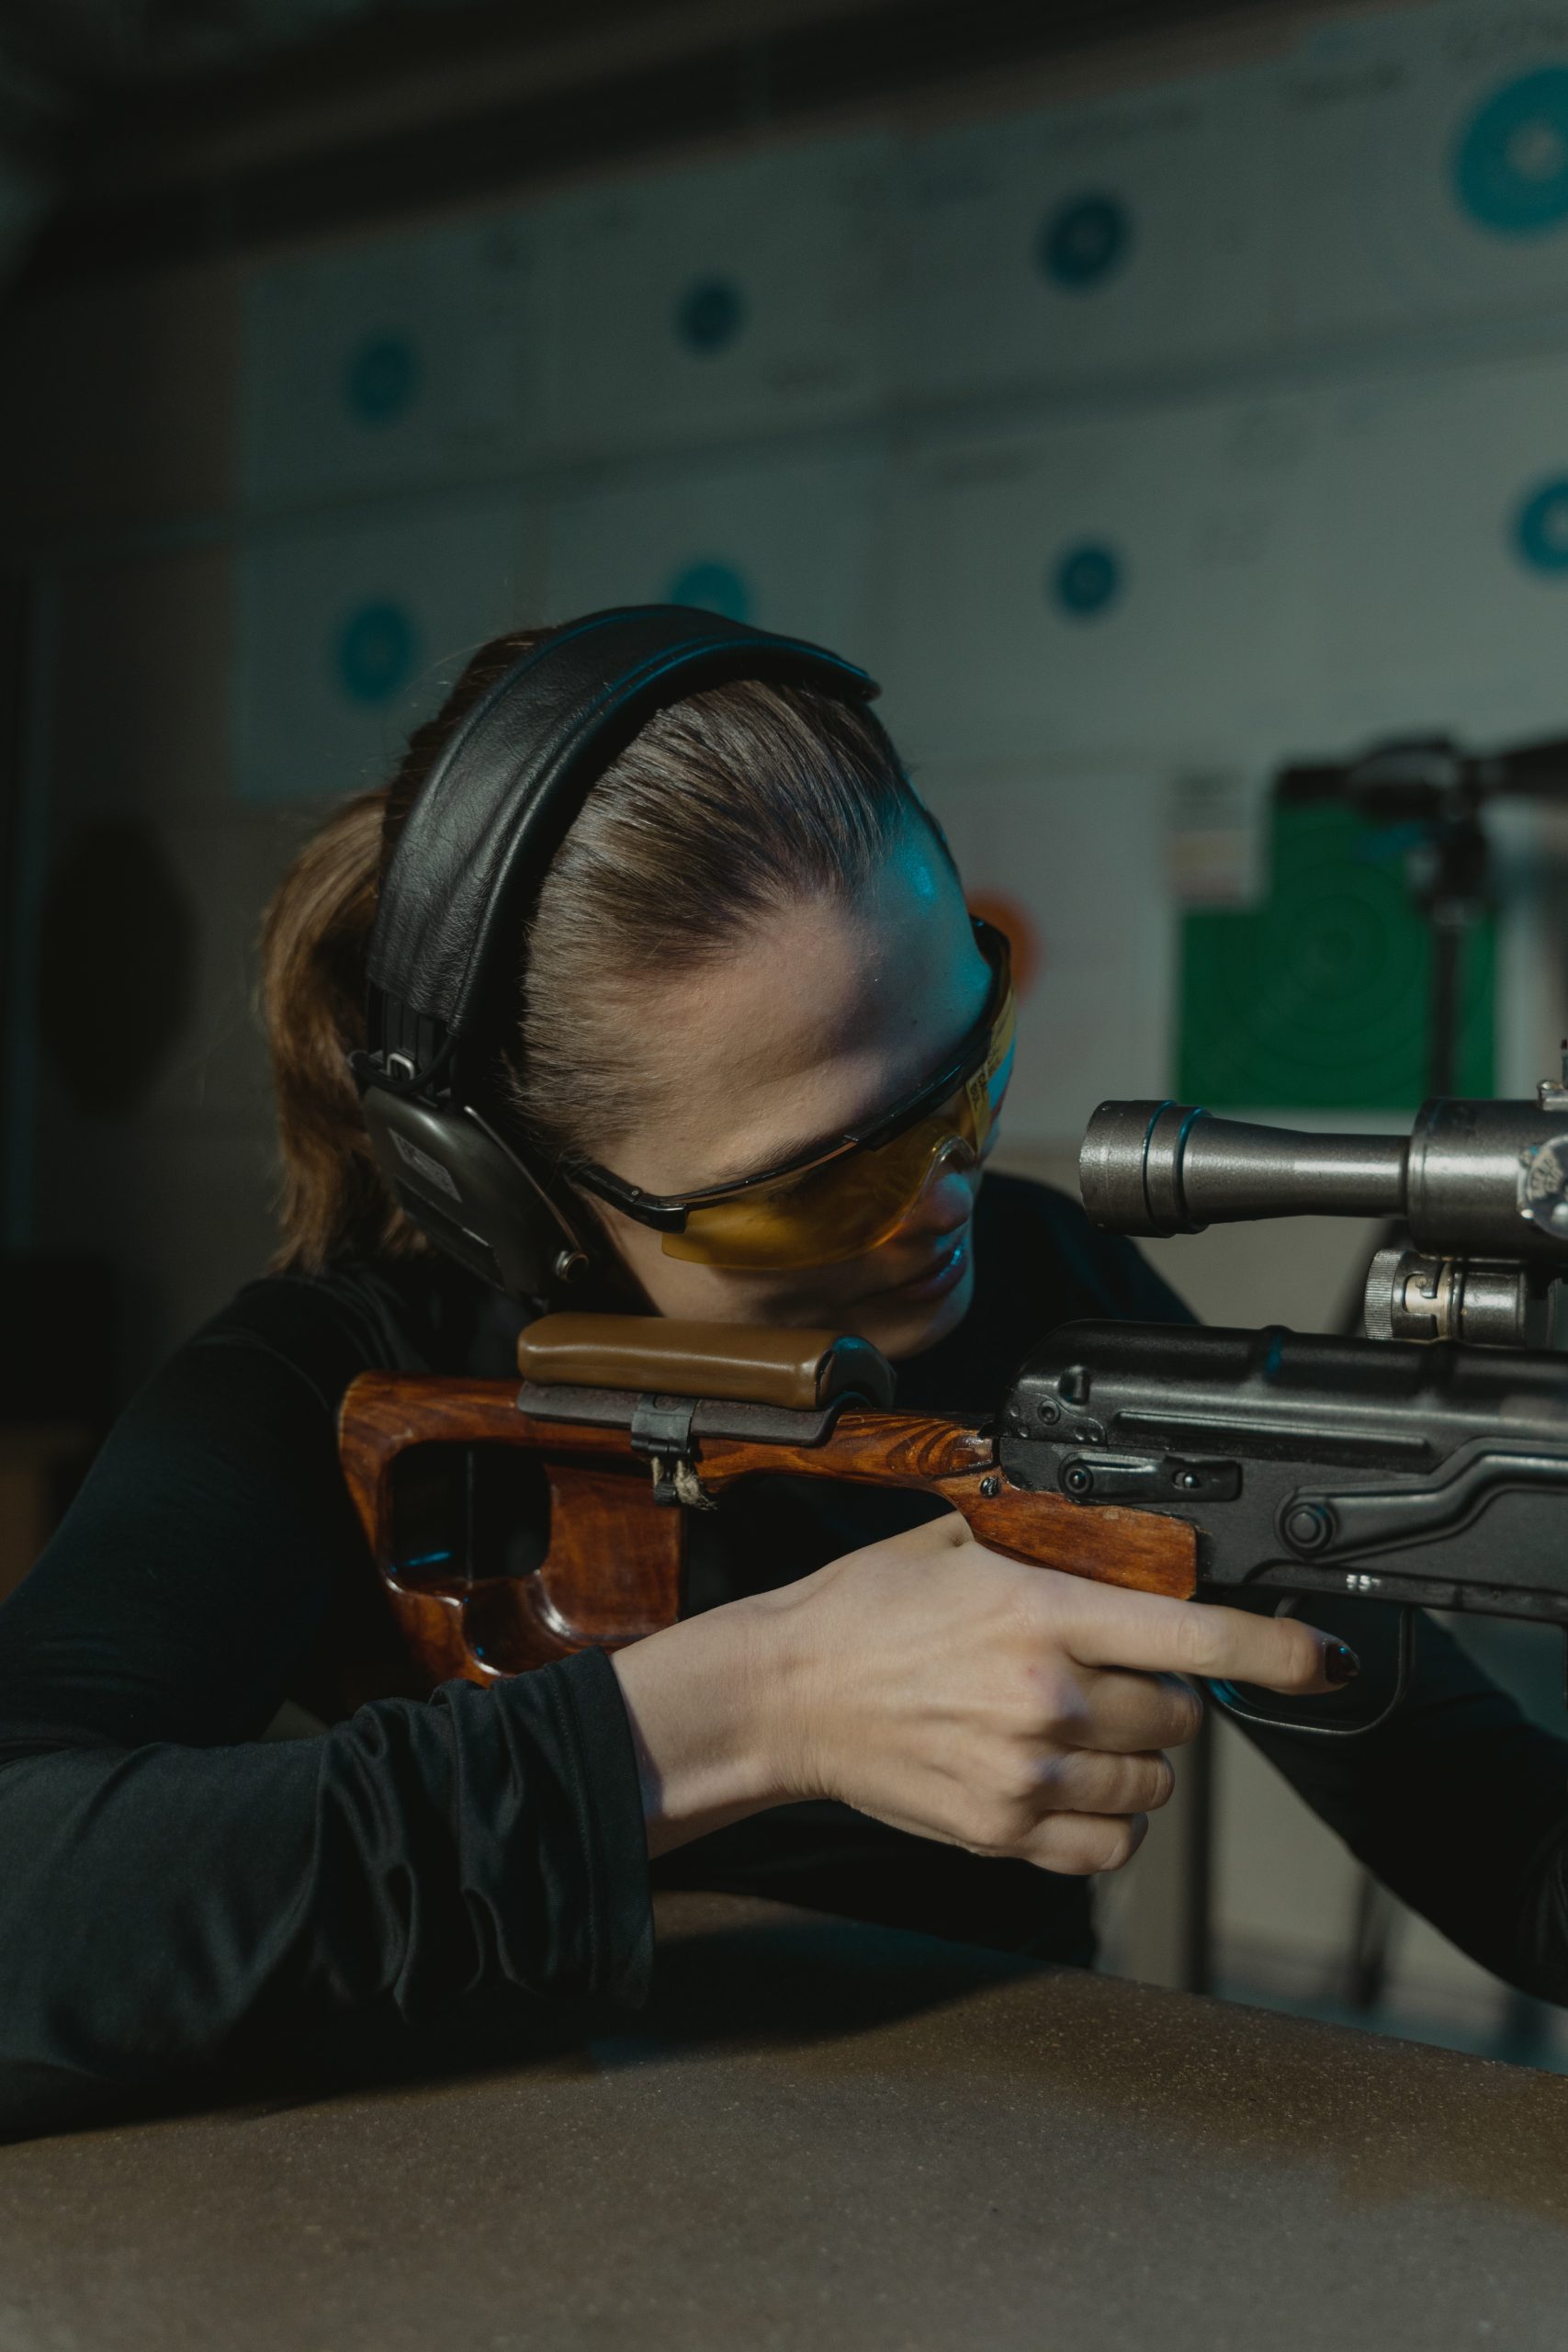 Shooting Basics: What Do You Need To Know?